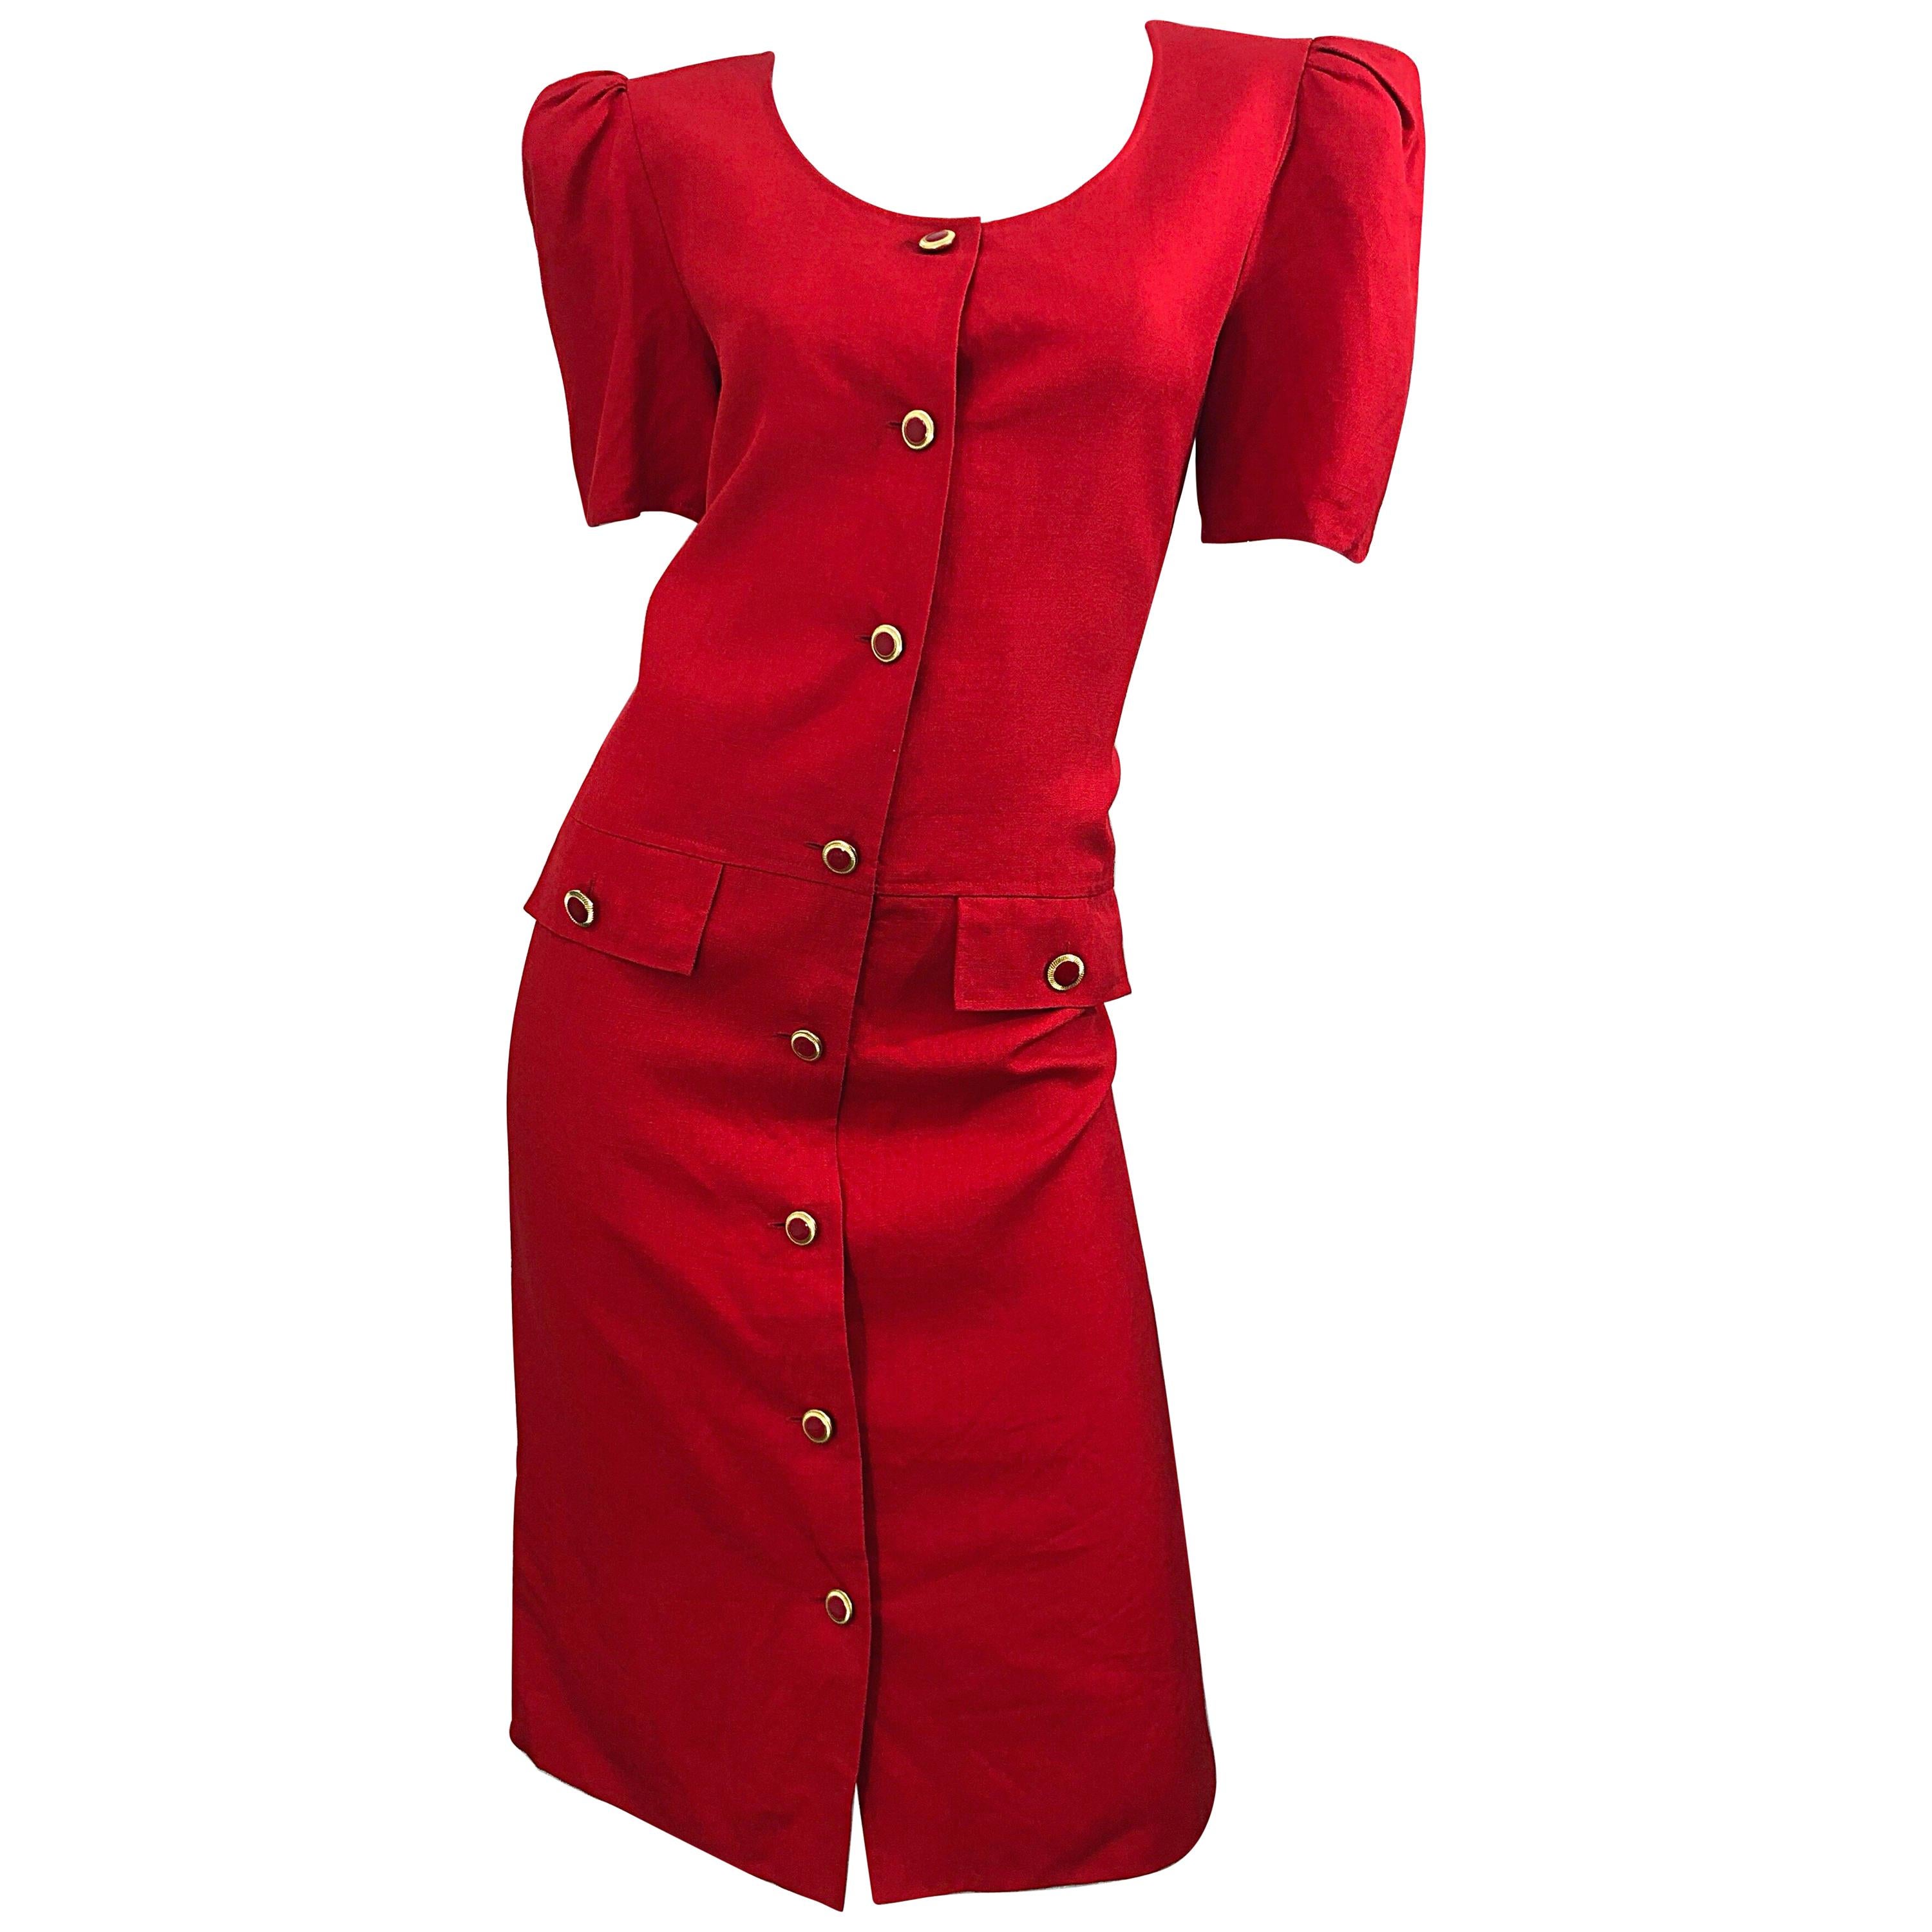 Vintage Adele Simpson I Magnin 1980s Size 10 Lipstick Red Linen Rayon 90s Dress For Sale